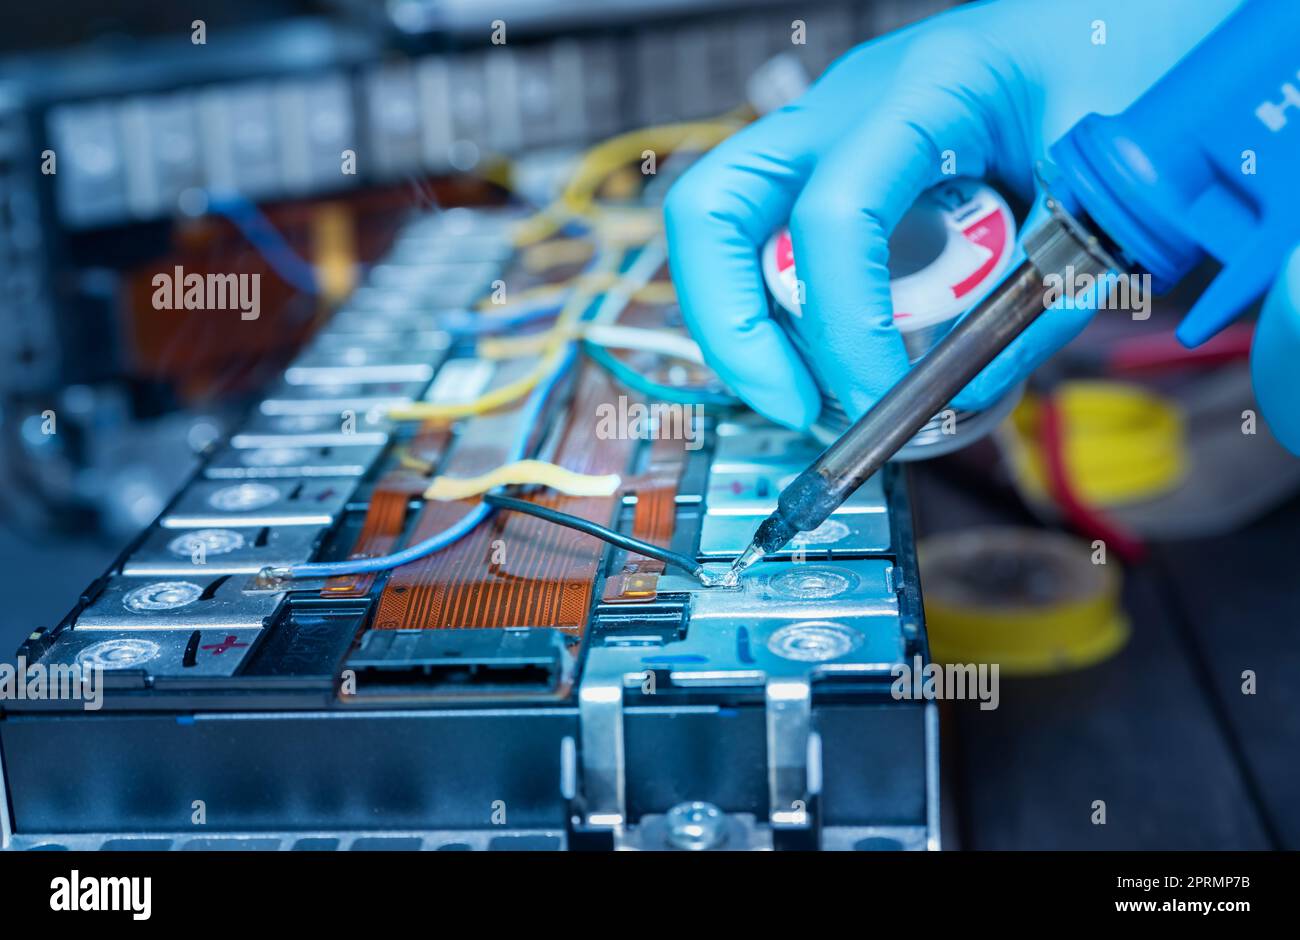 Technician use soldering iron to solder metal and wire of lithium-ion rechargeable battery. Repair module of Li-ion battery. Engineer hand holds soldering iron and tin-lead to solder electronic board. Stock Photo